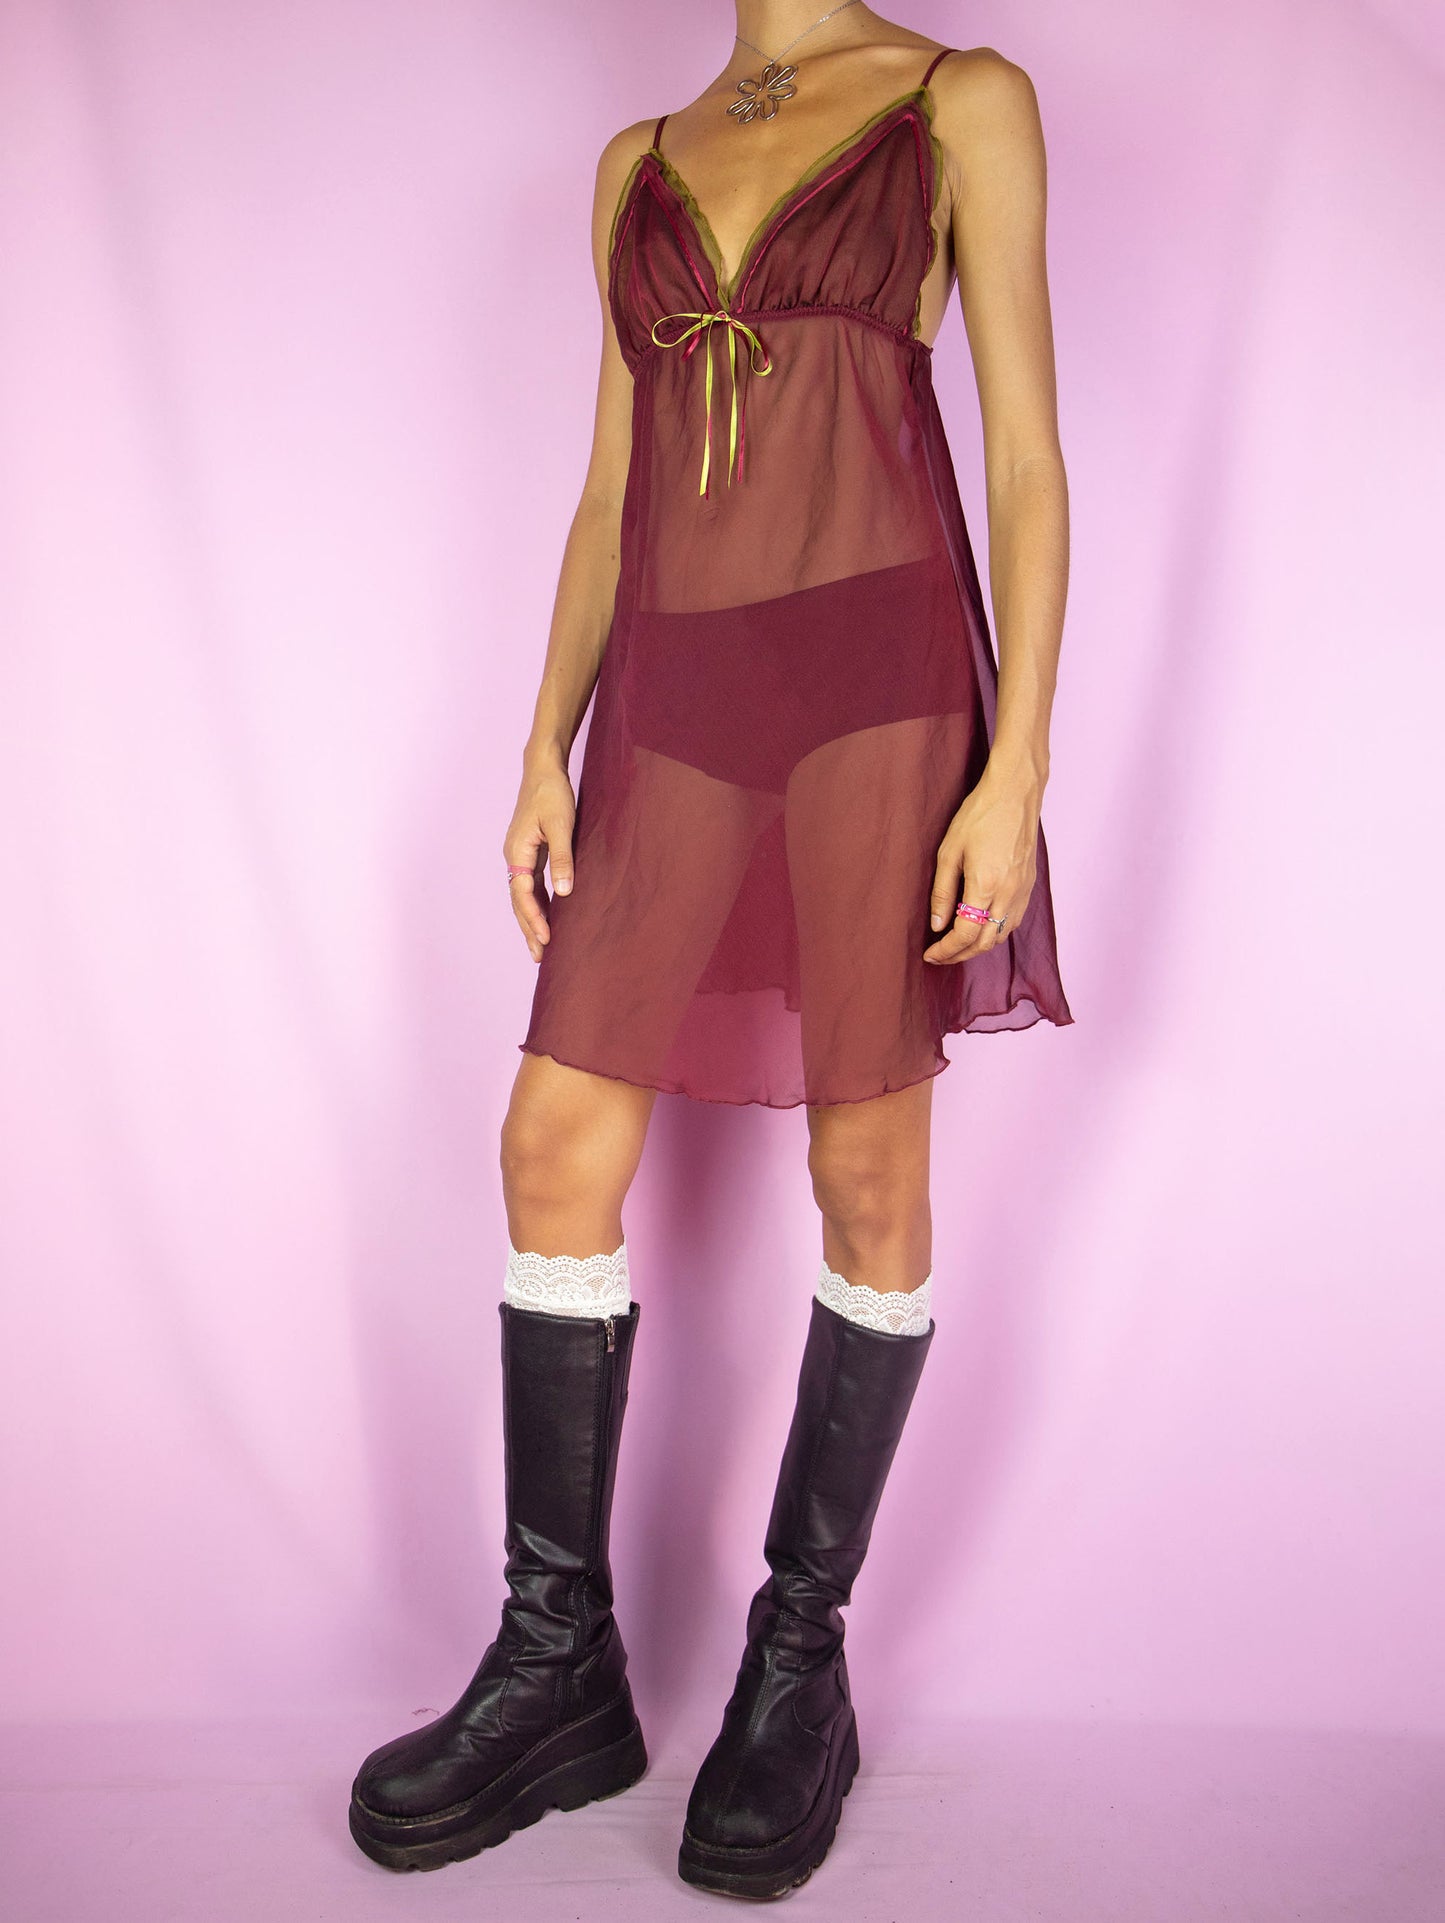 The Vintage 90s Maroon Sheer Slip Dress is a semi-sheer burgundy maroon red cami mini dress with adjustable straps. Romantic sexy 1990s lingerie night dress.